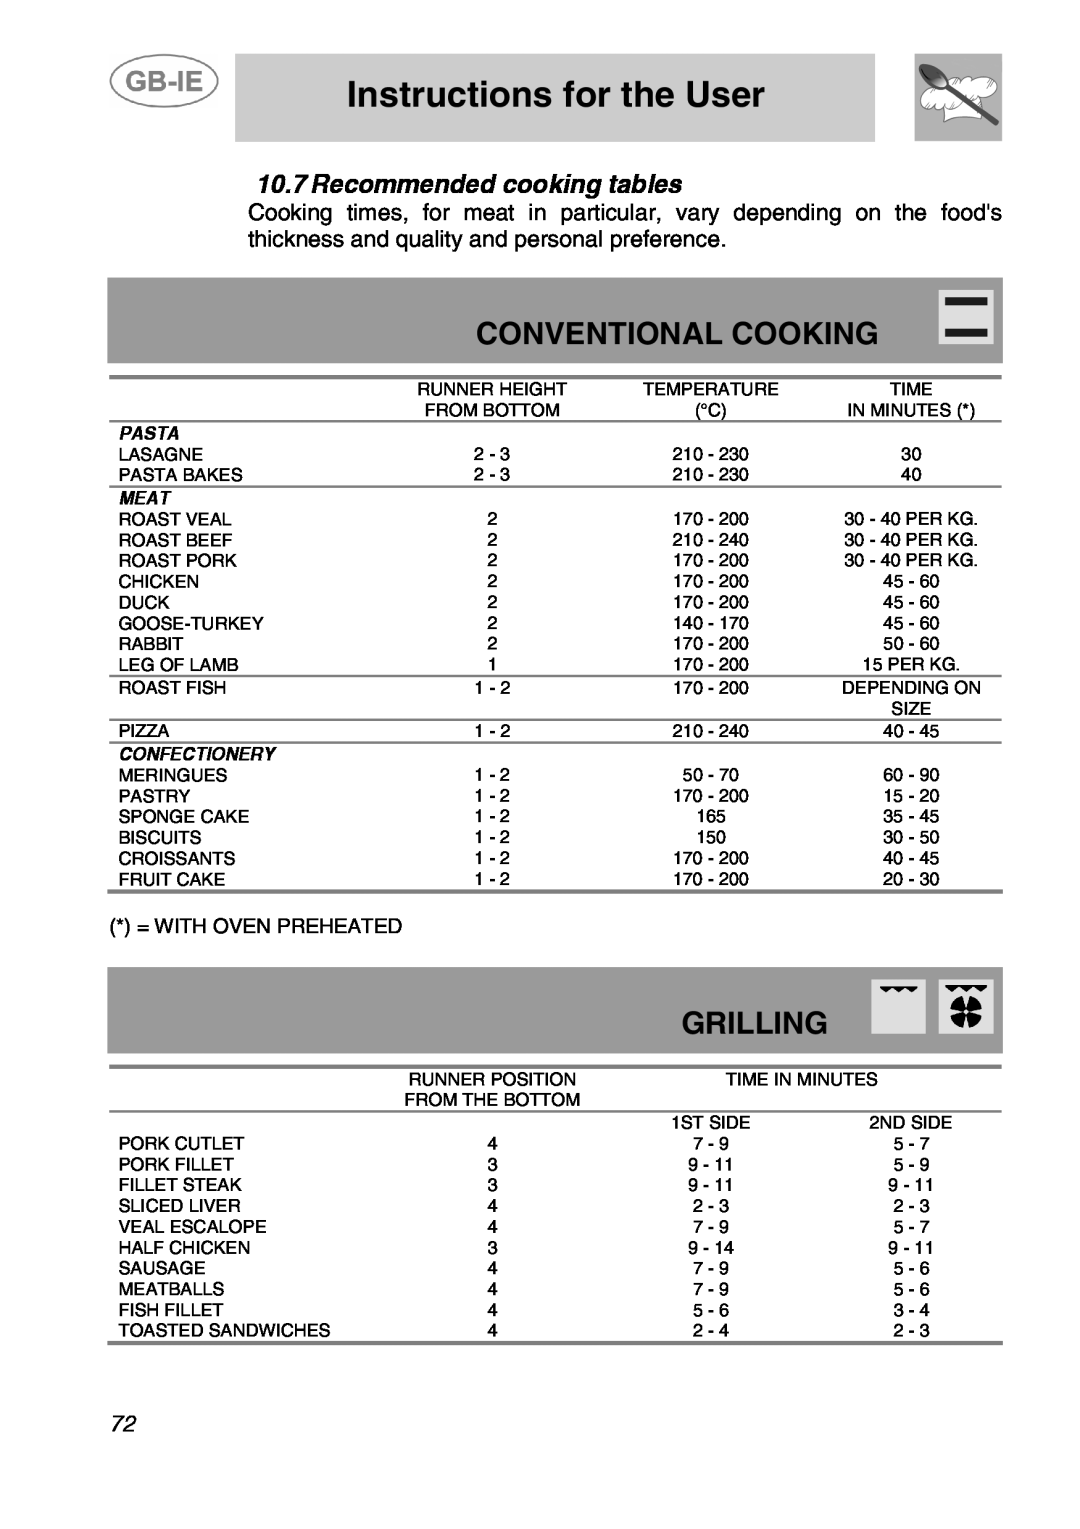 Smeg A5-6 manual Conventional Cooking, Grilling, Recommended cooking tables, Instructions for the User, Pasta, Meat 